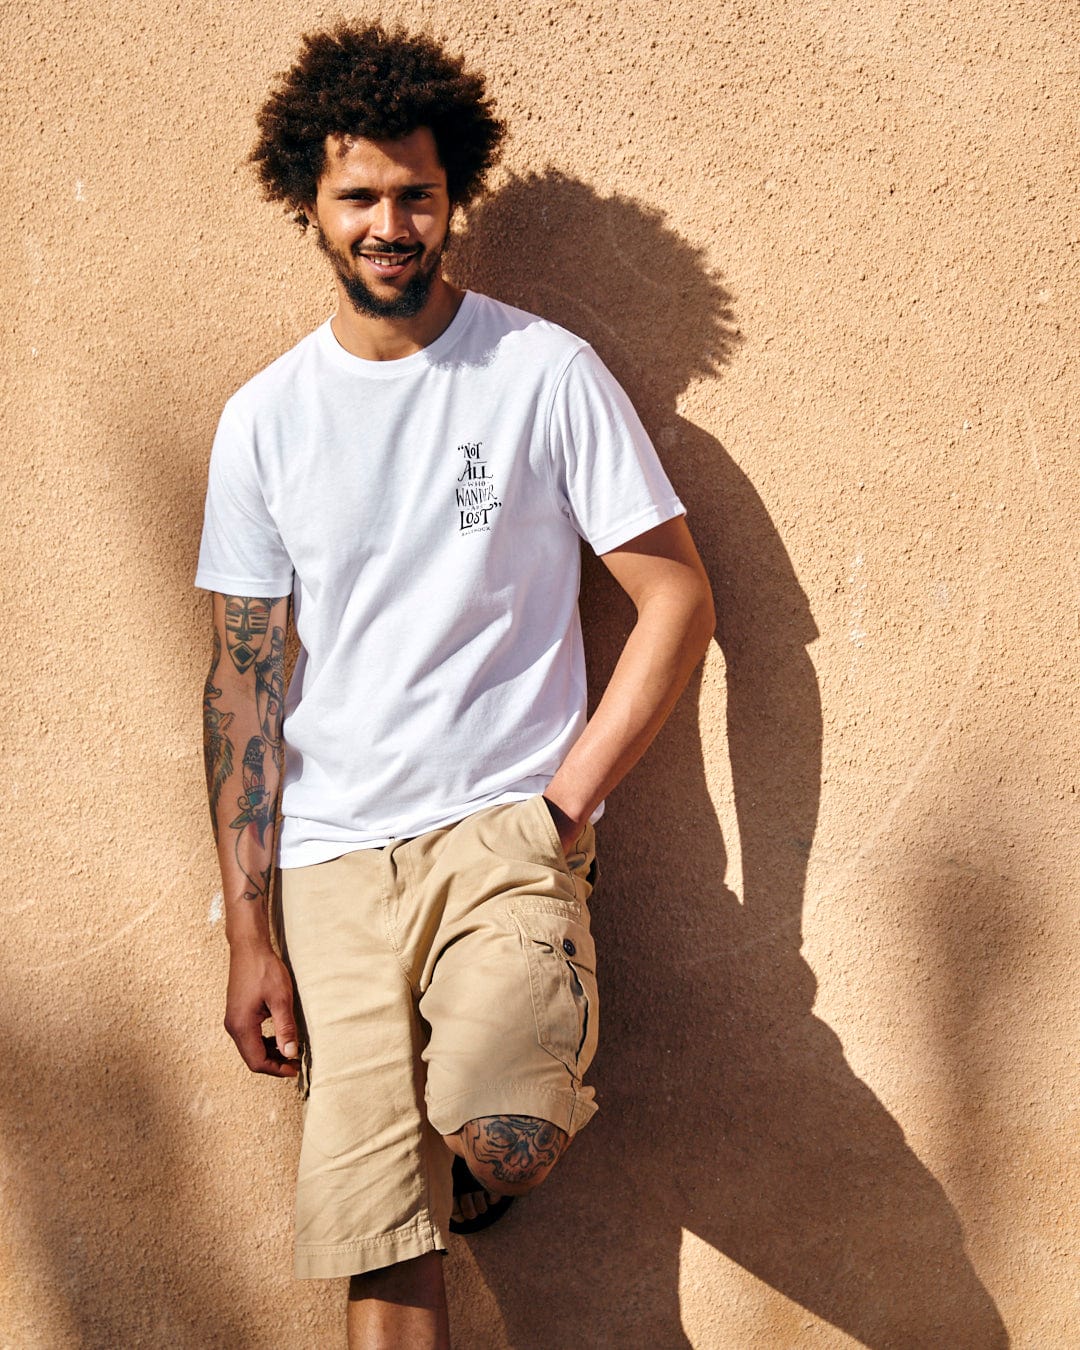 Young man with curly hair and tattoos smiling while leaning against a sunlit beige wall, wearing a Saltrock Lost Ships Short Sleeve T-Shirt in White and tan shorts.